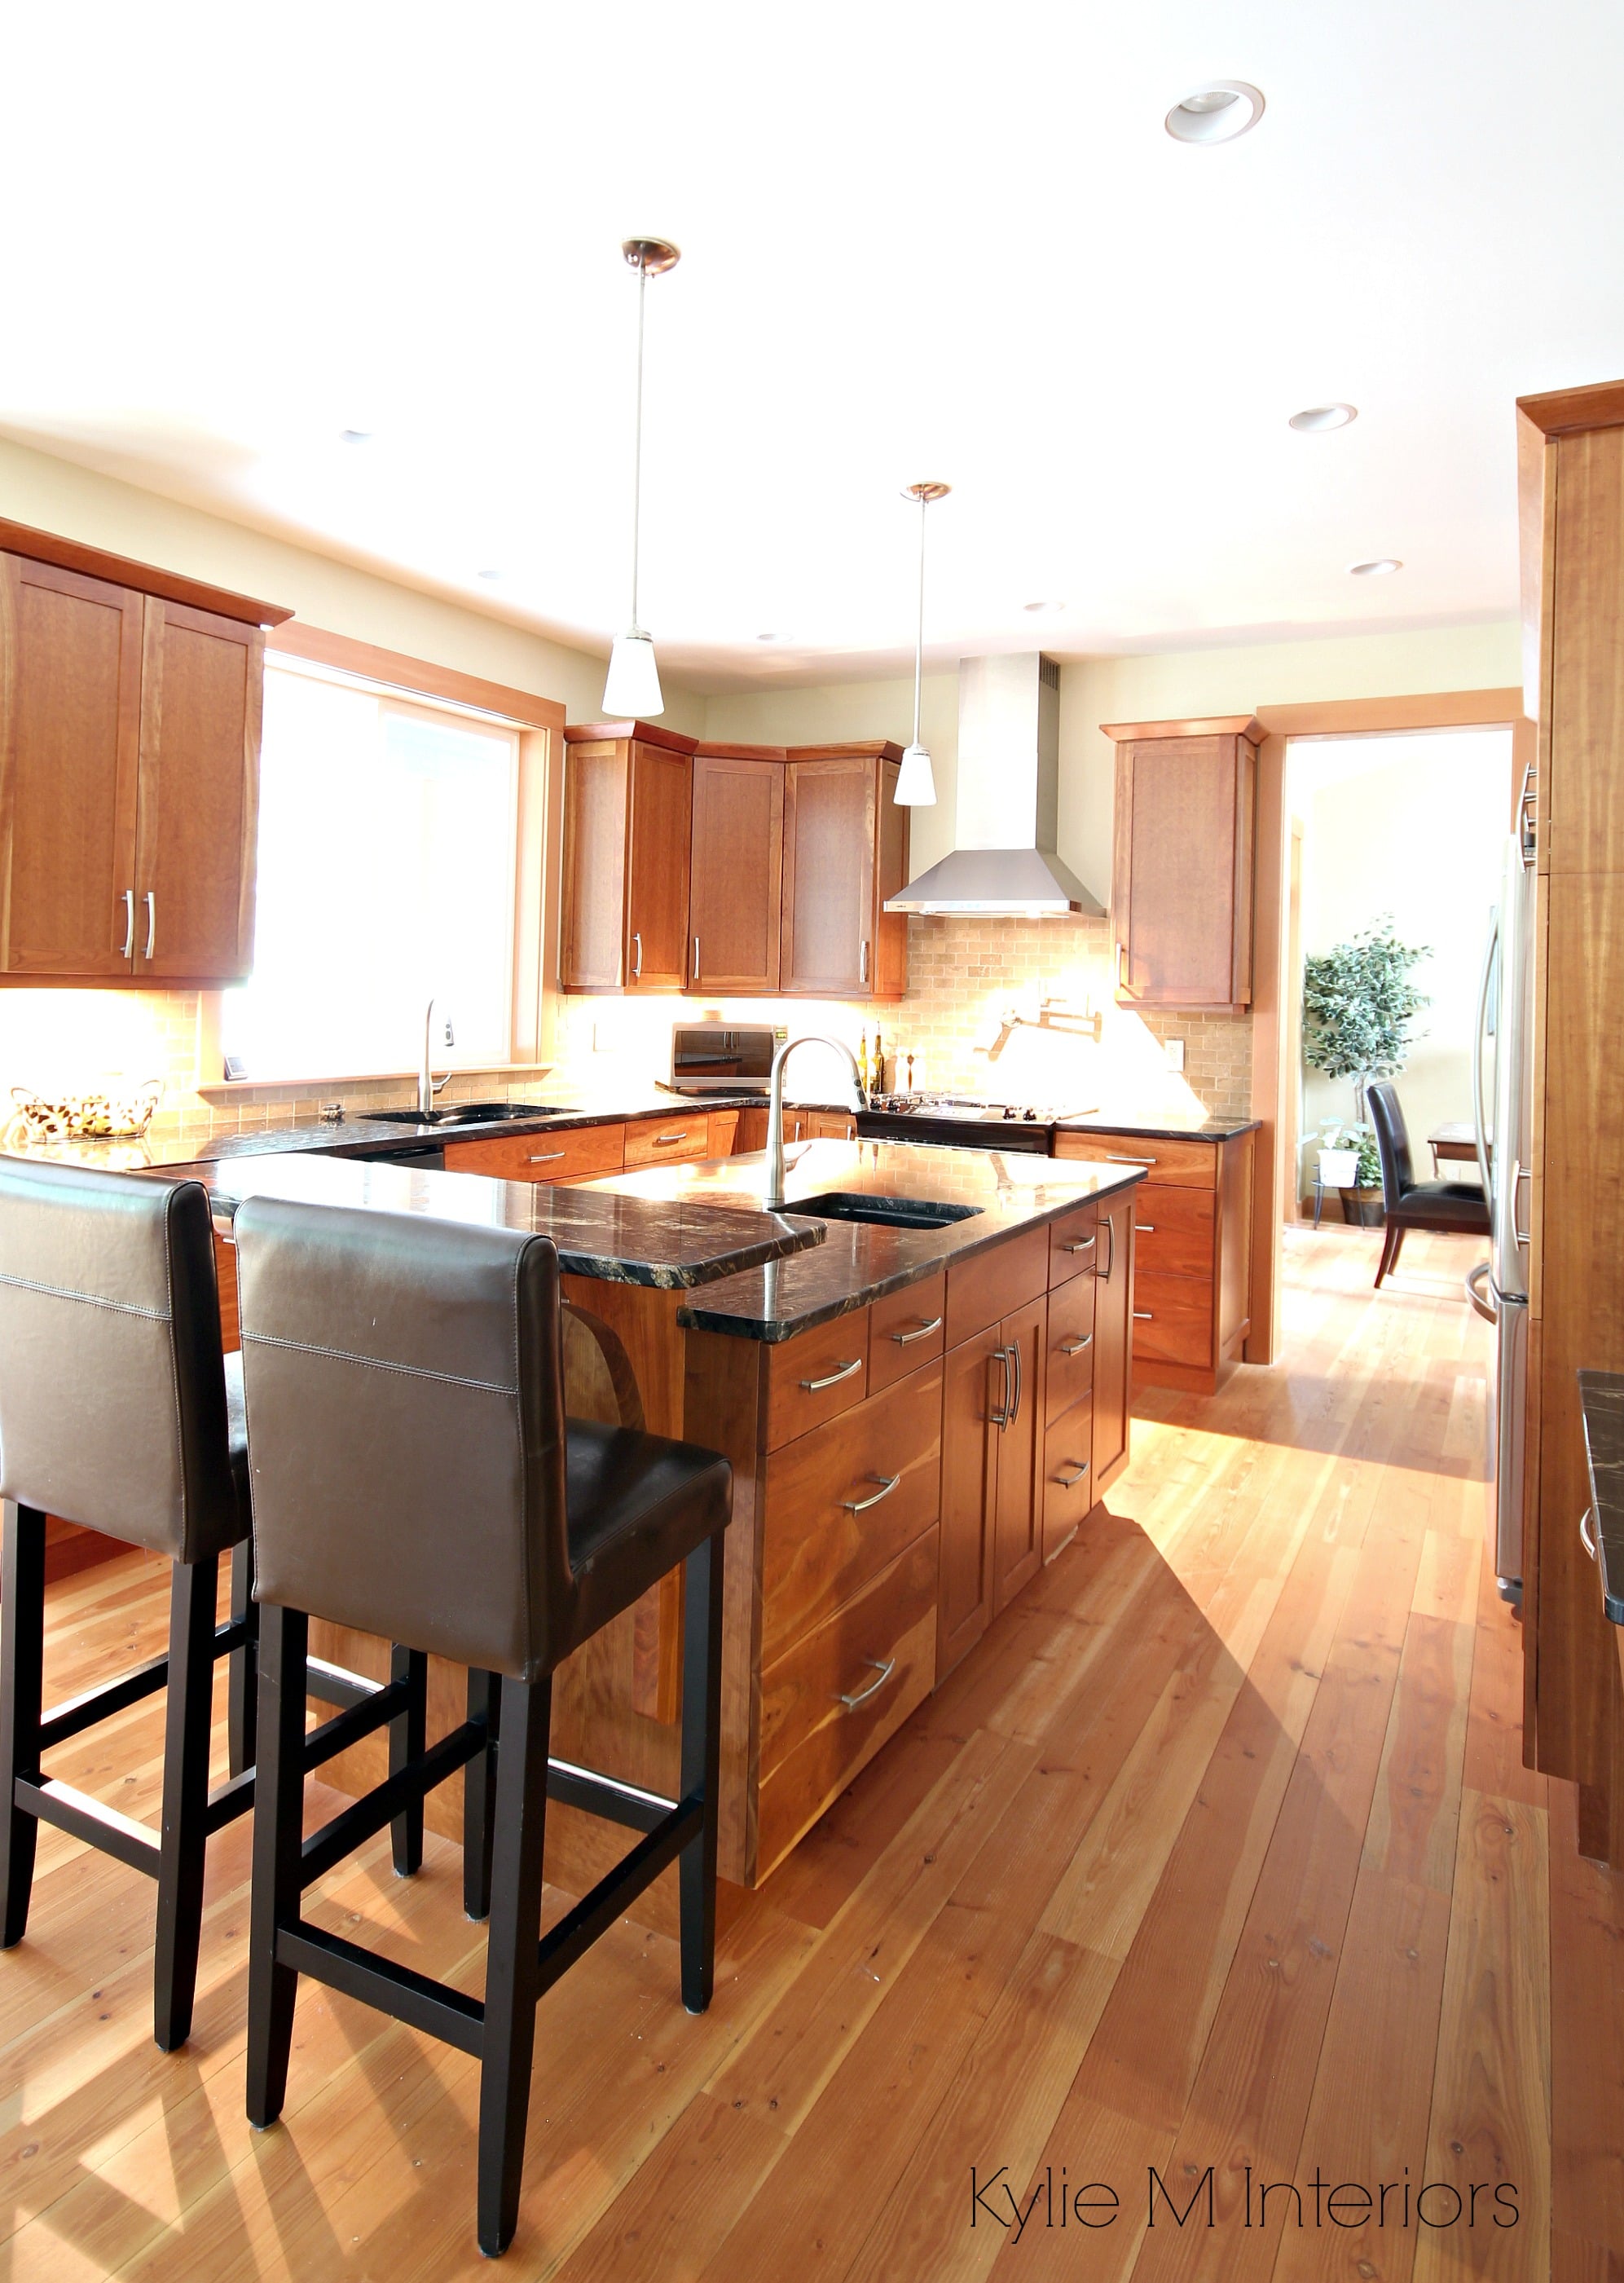 Kitchen With Natural Cherry Cabinets And Fir Flooring Island With